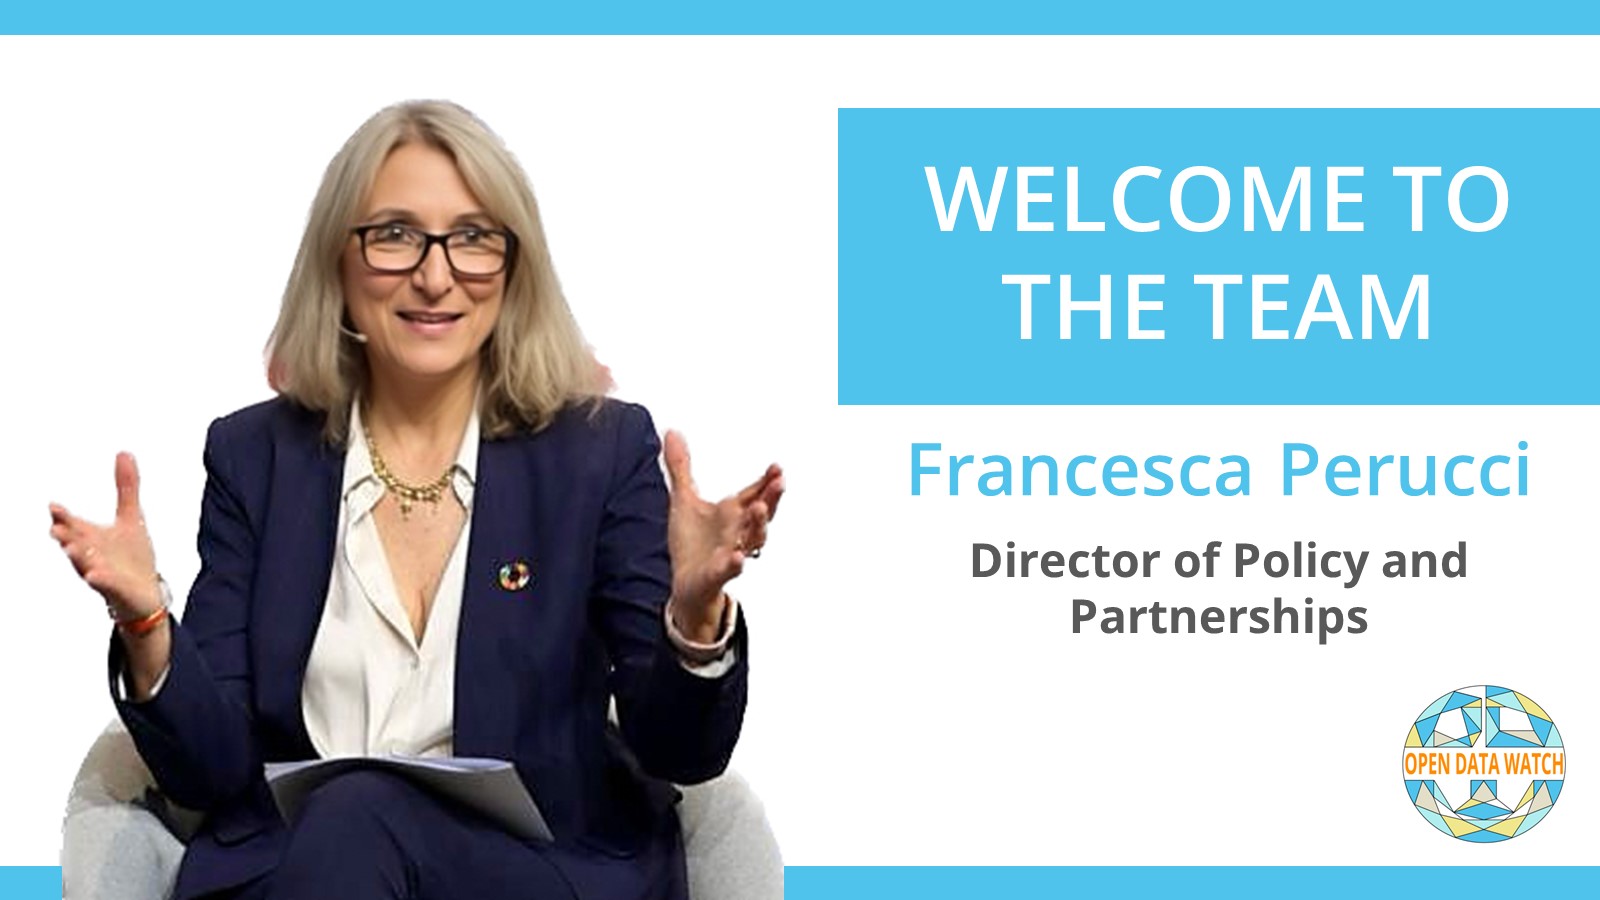 Welcoming Francesca Perucci to the Open Data Watch Team